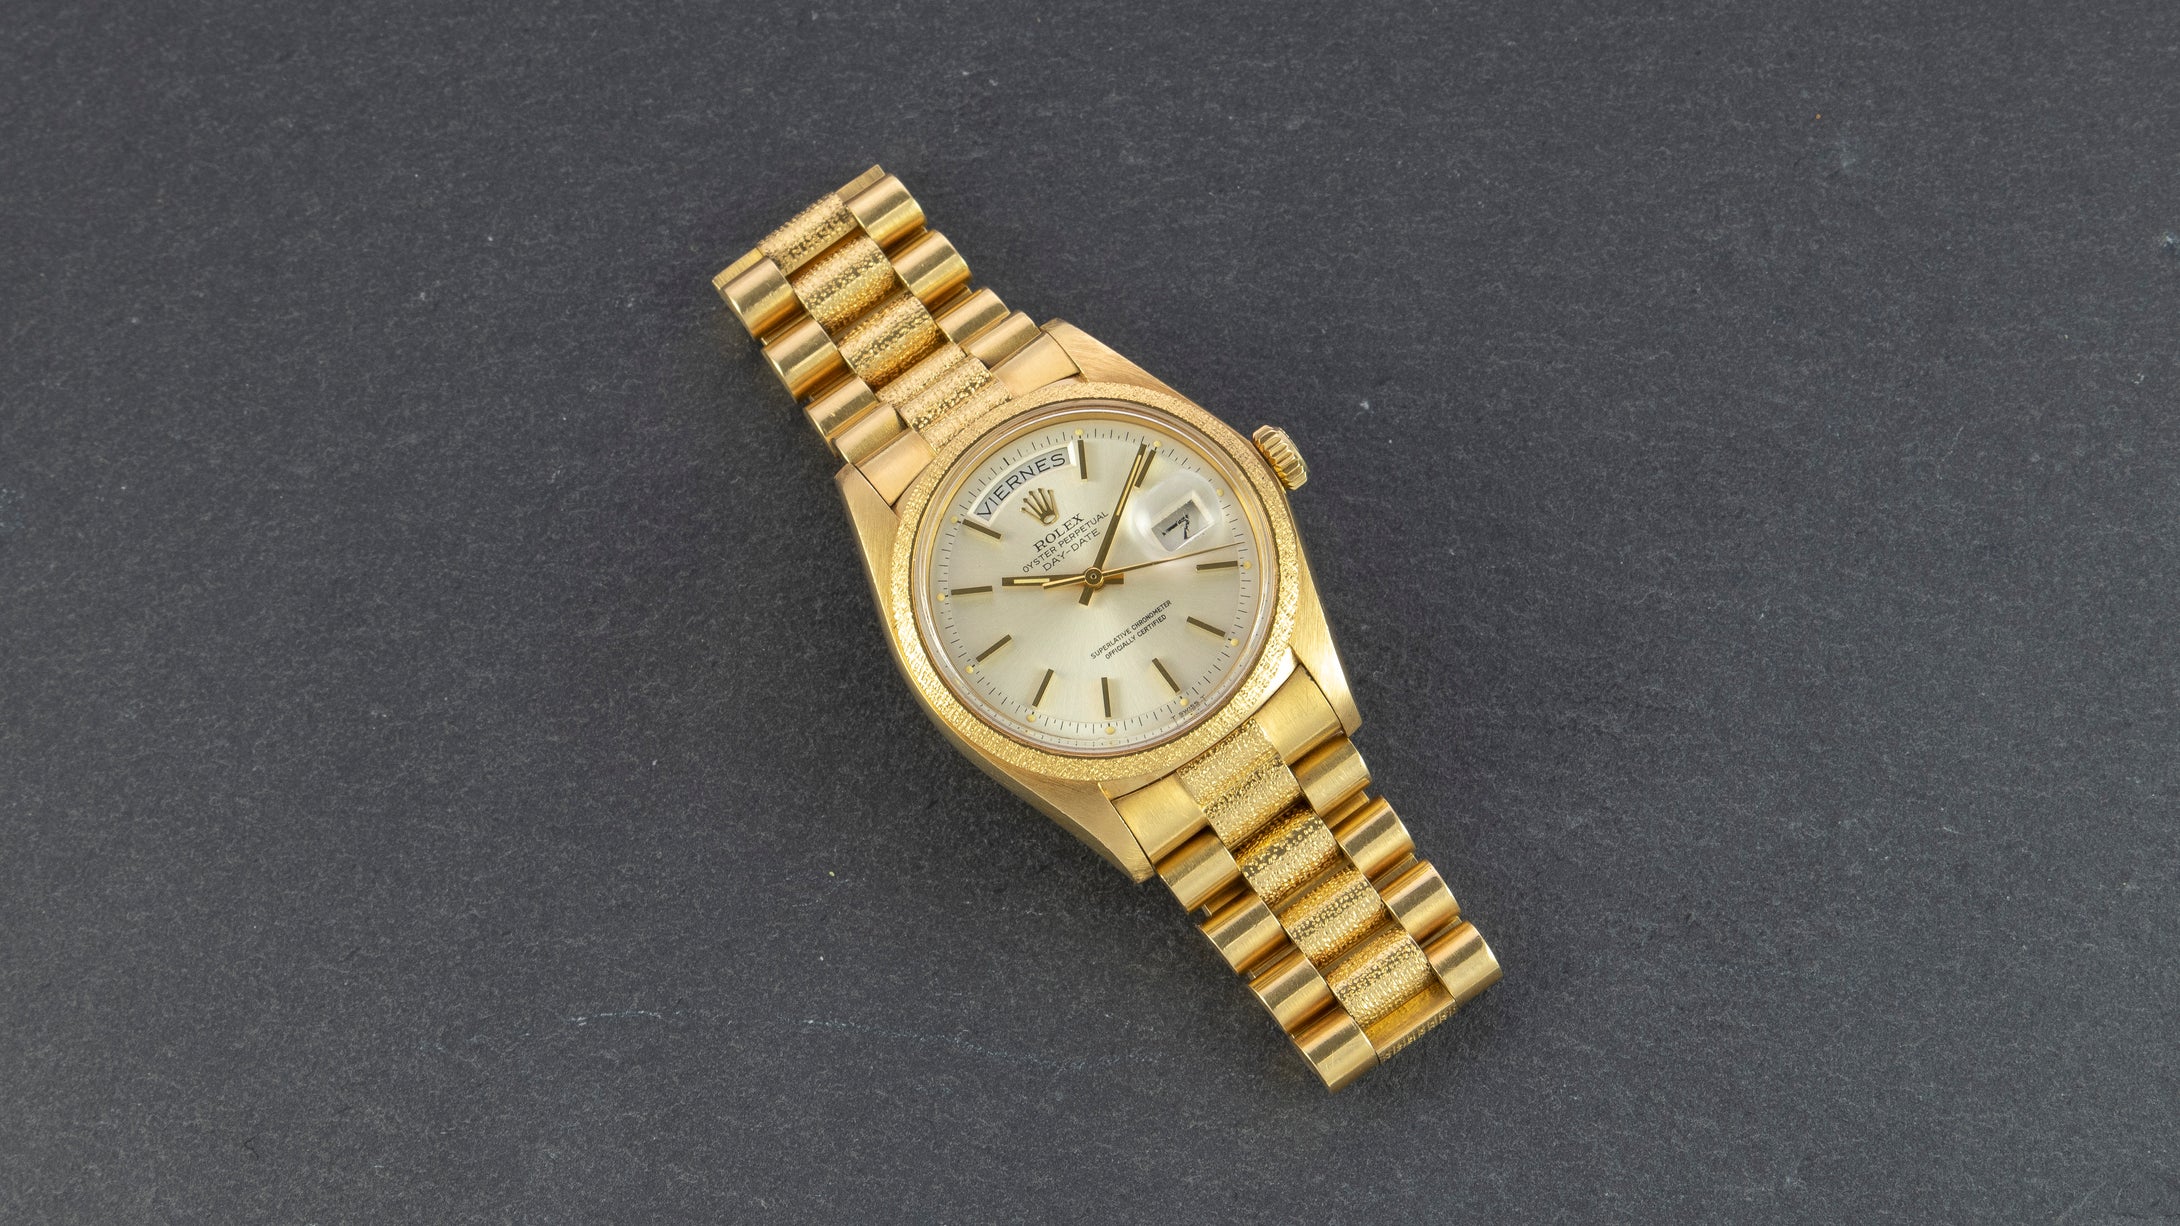 Rolex 18K Yellow Gold Day-Date President Watch with Silver Dial and Factory Morellis Finish | Veralet